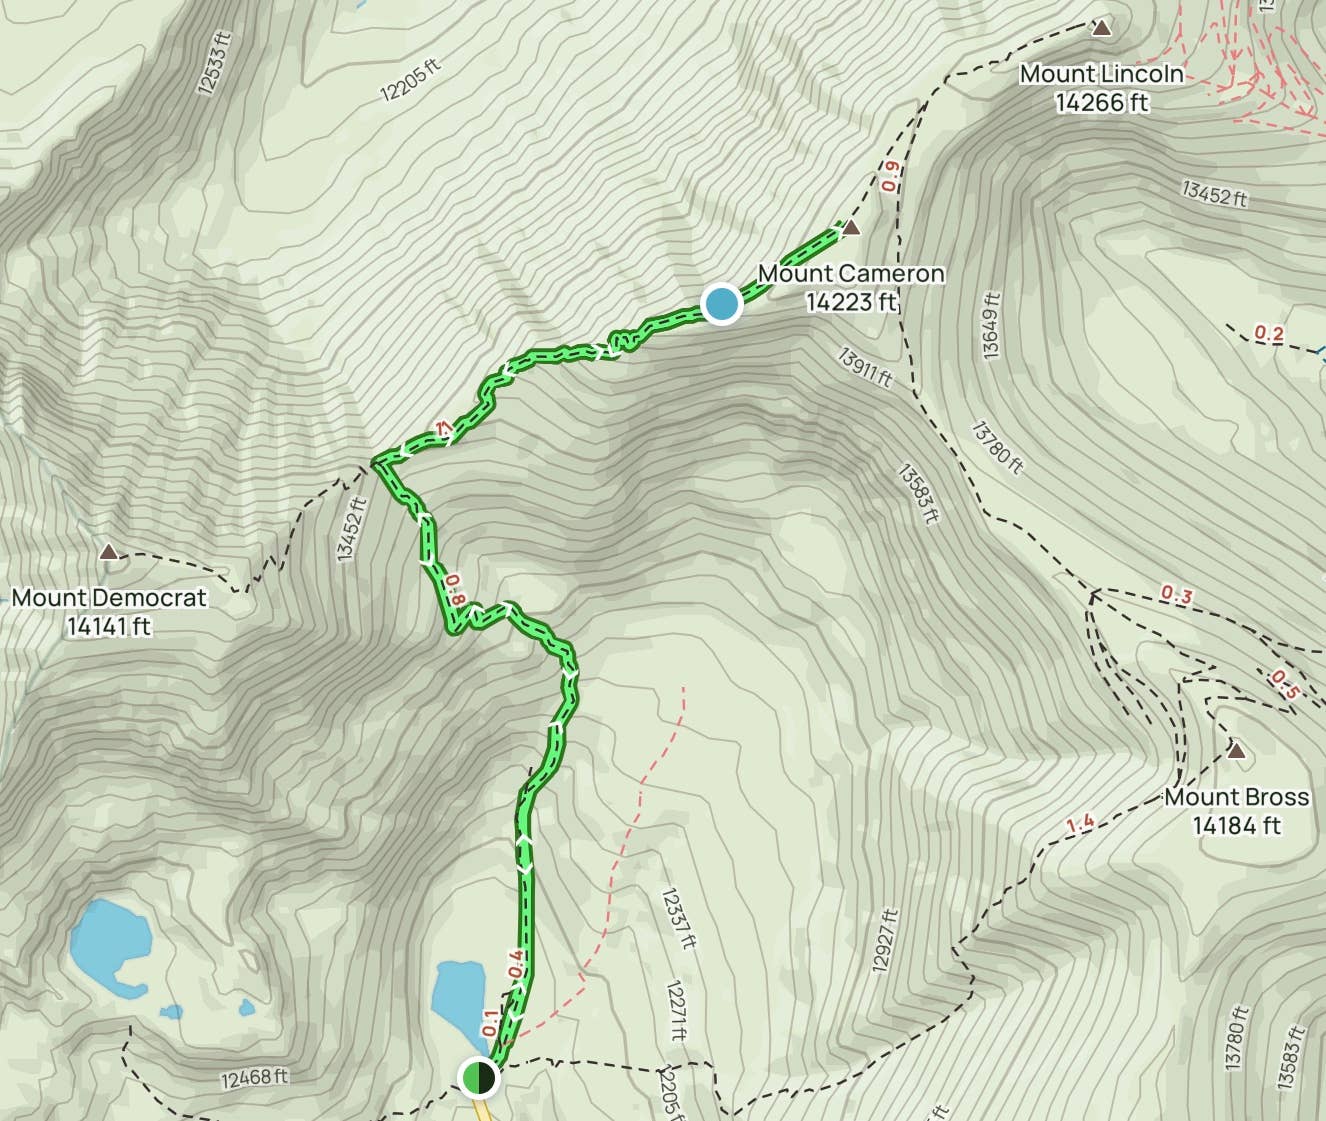 Topographical map of the Decalibron Trail